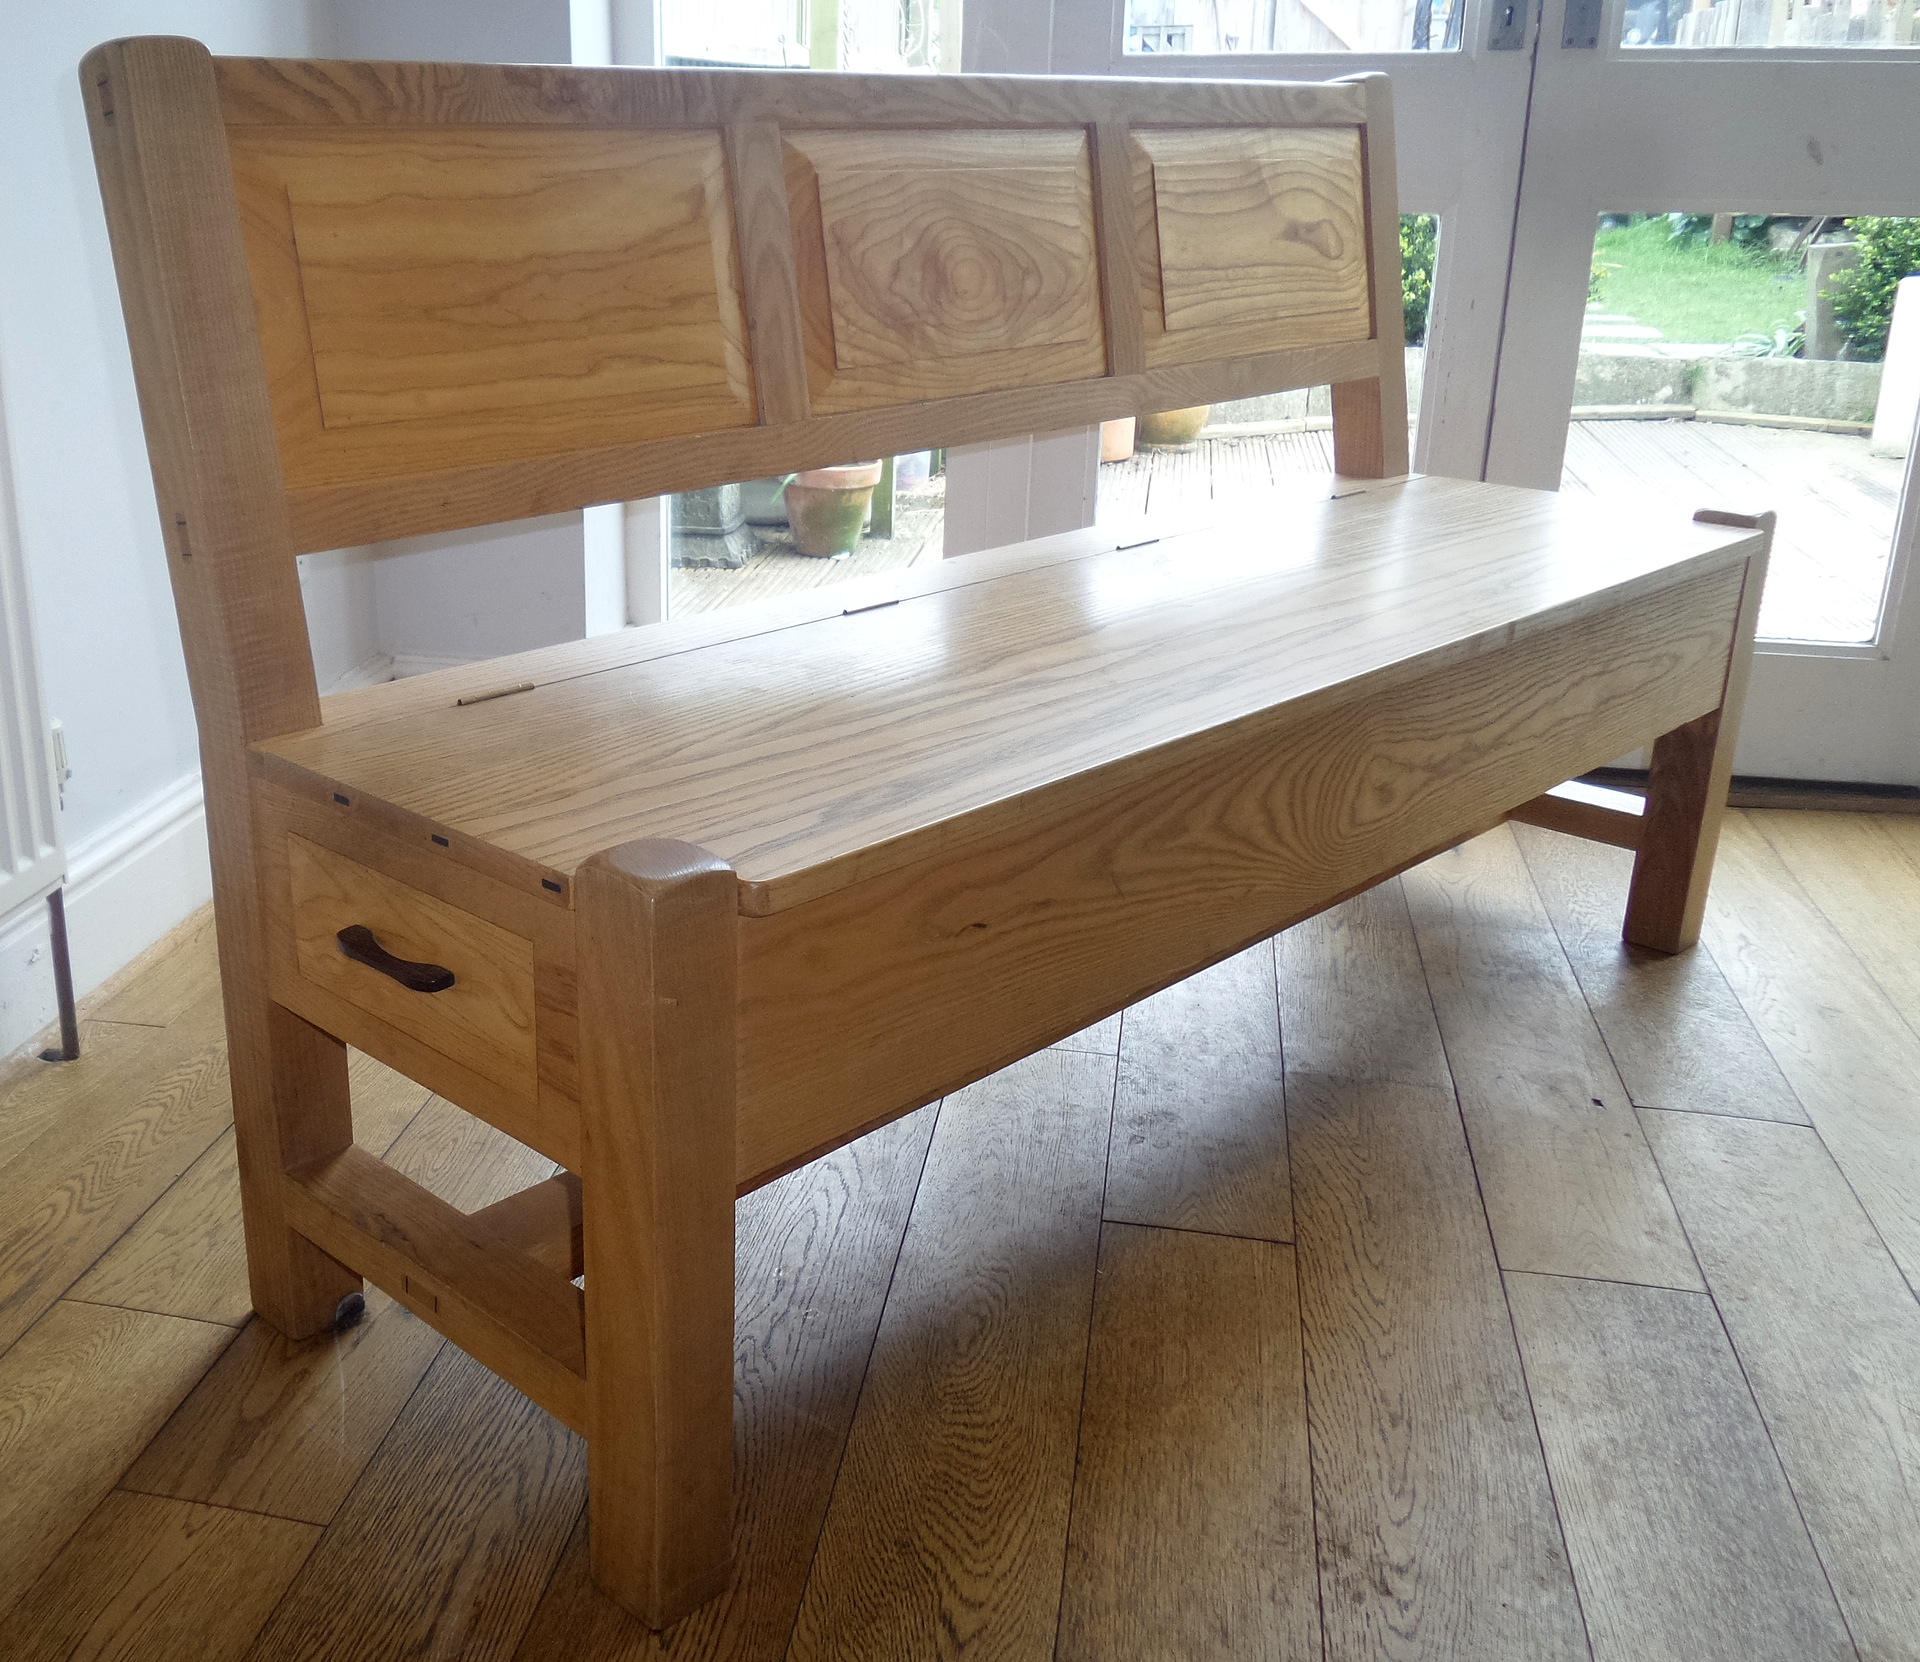 Bespoke Ash Bench with Twin Drawers | Ralls & Sons